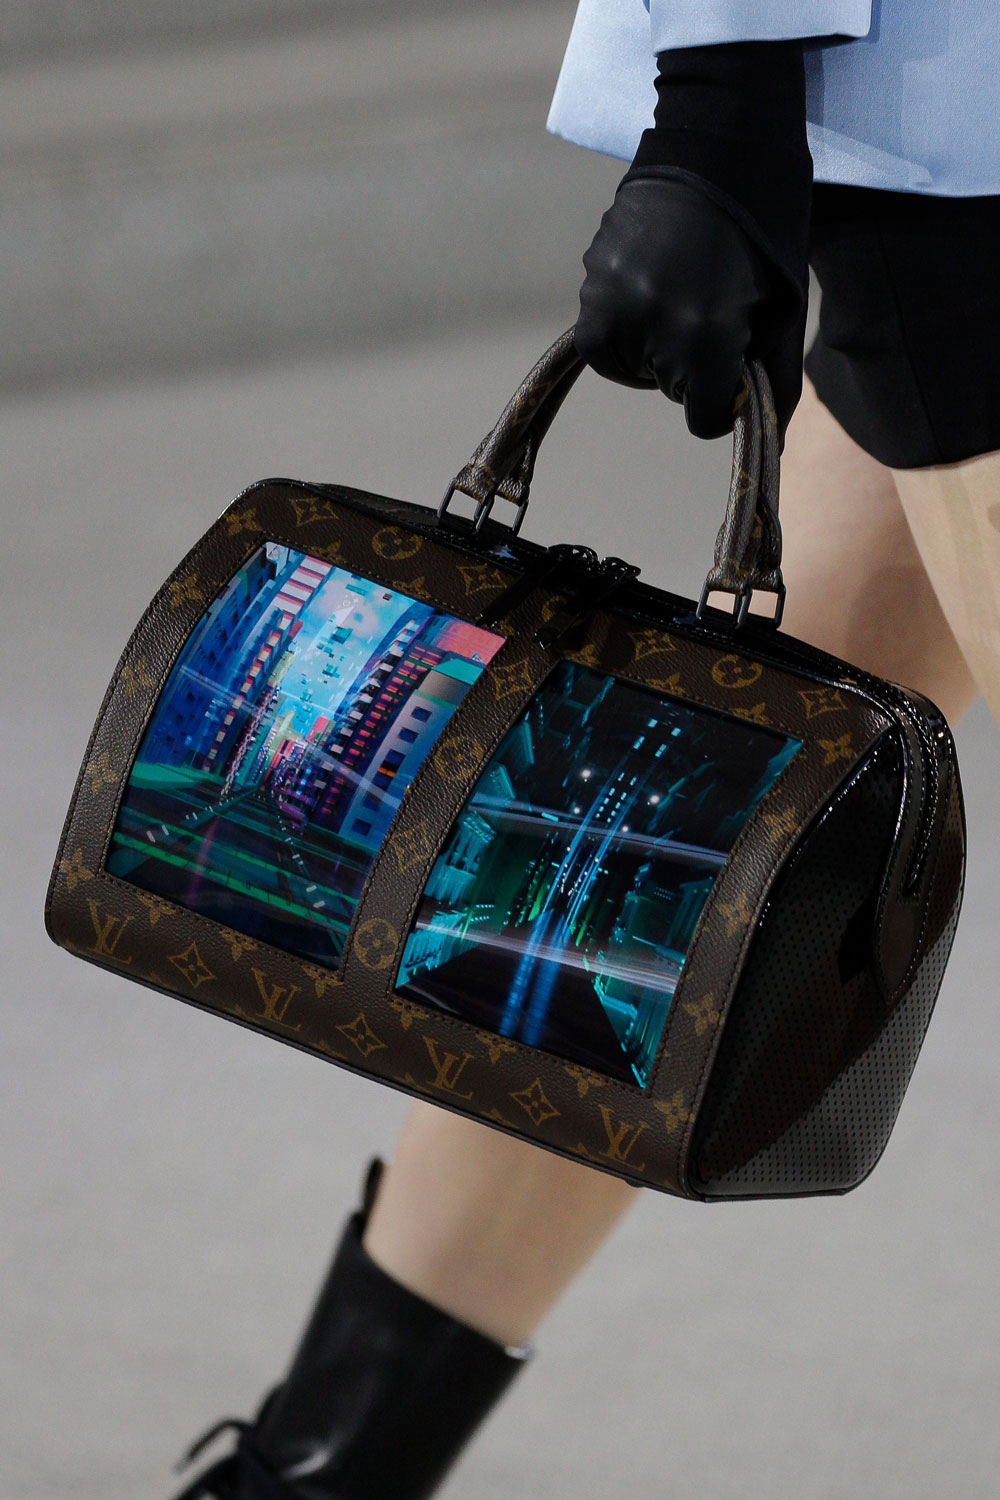 Chroma key from @louisvuitton. A new bag from @NicolasGhesquiere's